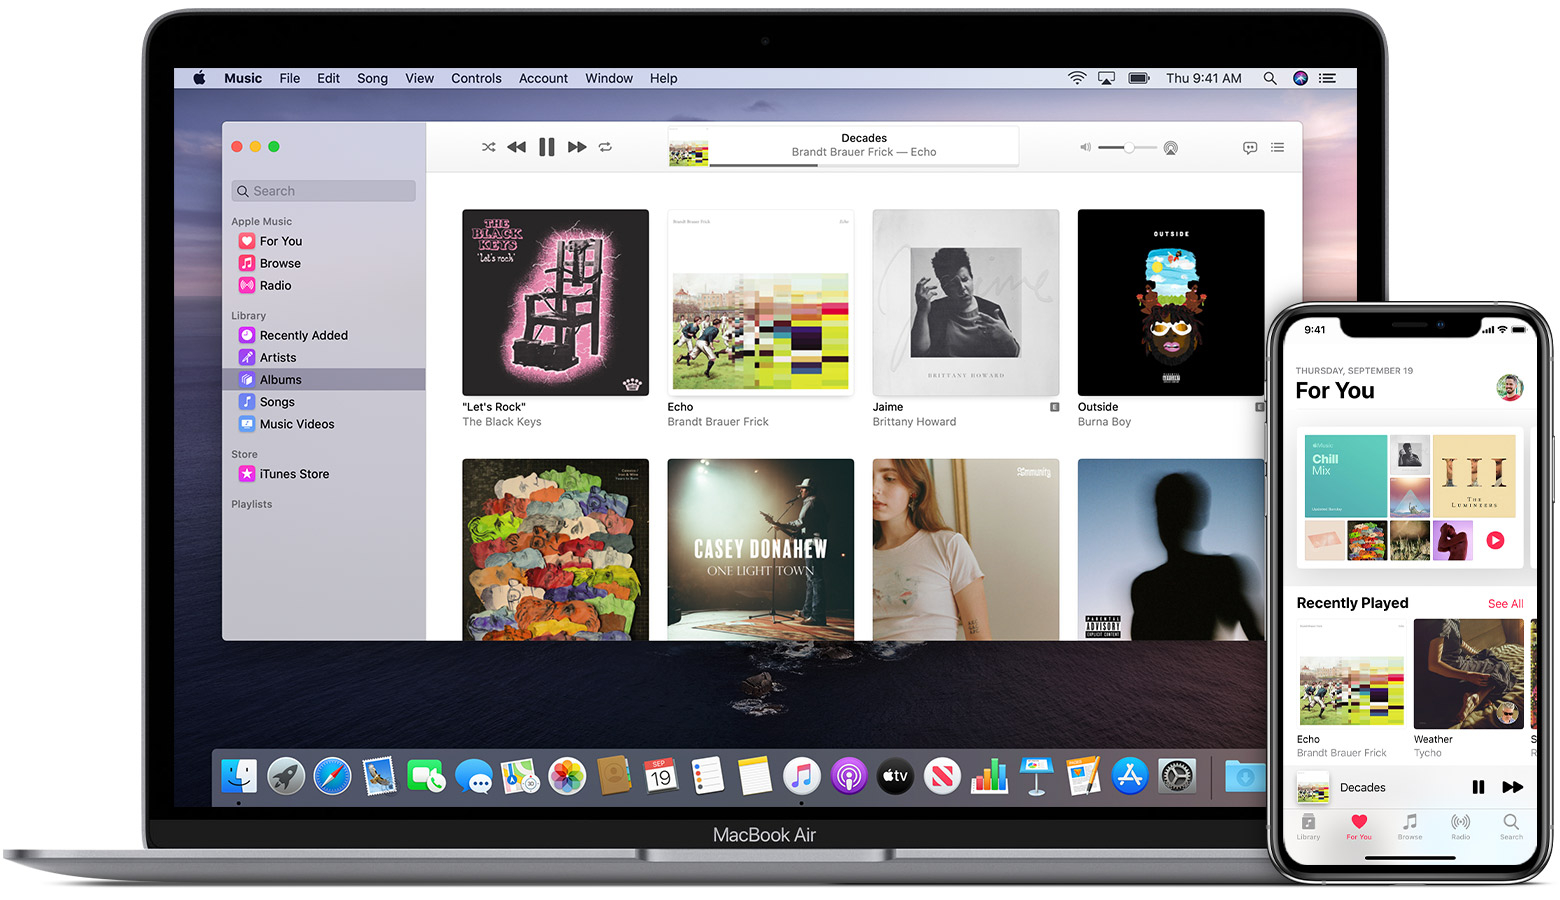 Join Apple Music on your iPhone, iPad, iPod touch, Mac, or